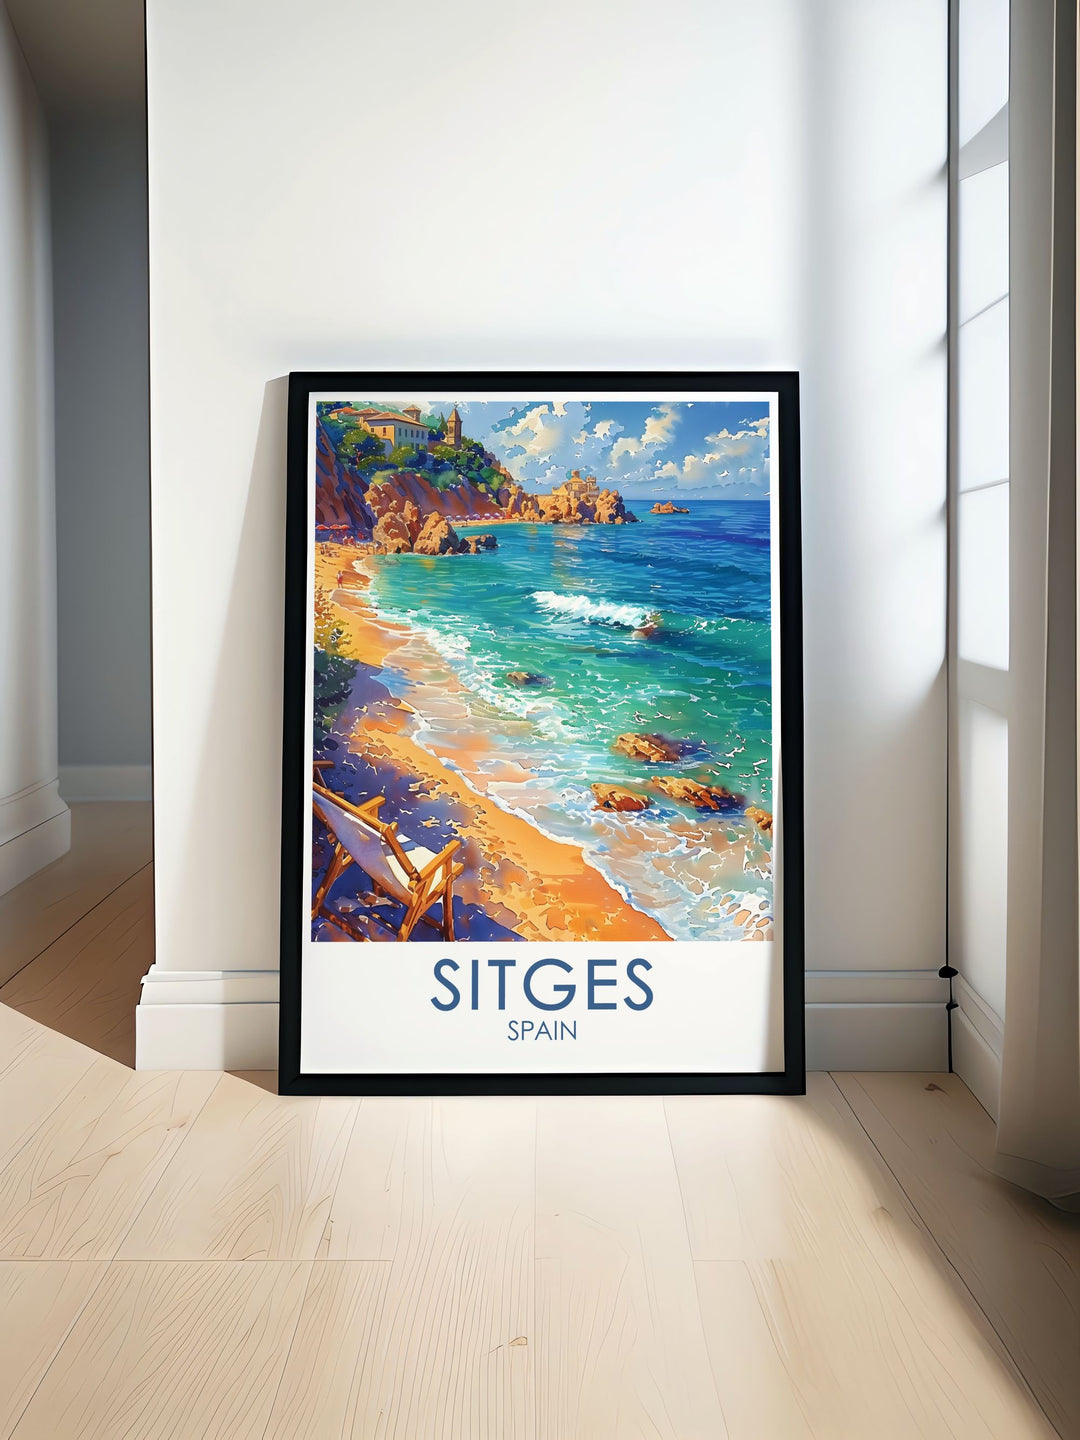 This vintage inspired poster of Sitges captures the timeless beauty of its historic streets and stunning beaches, offering a glimpse into one of Spains most beloved seaside destinations.